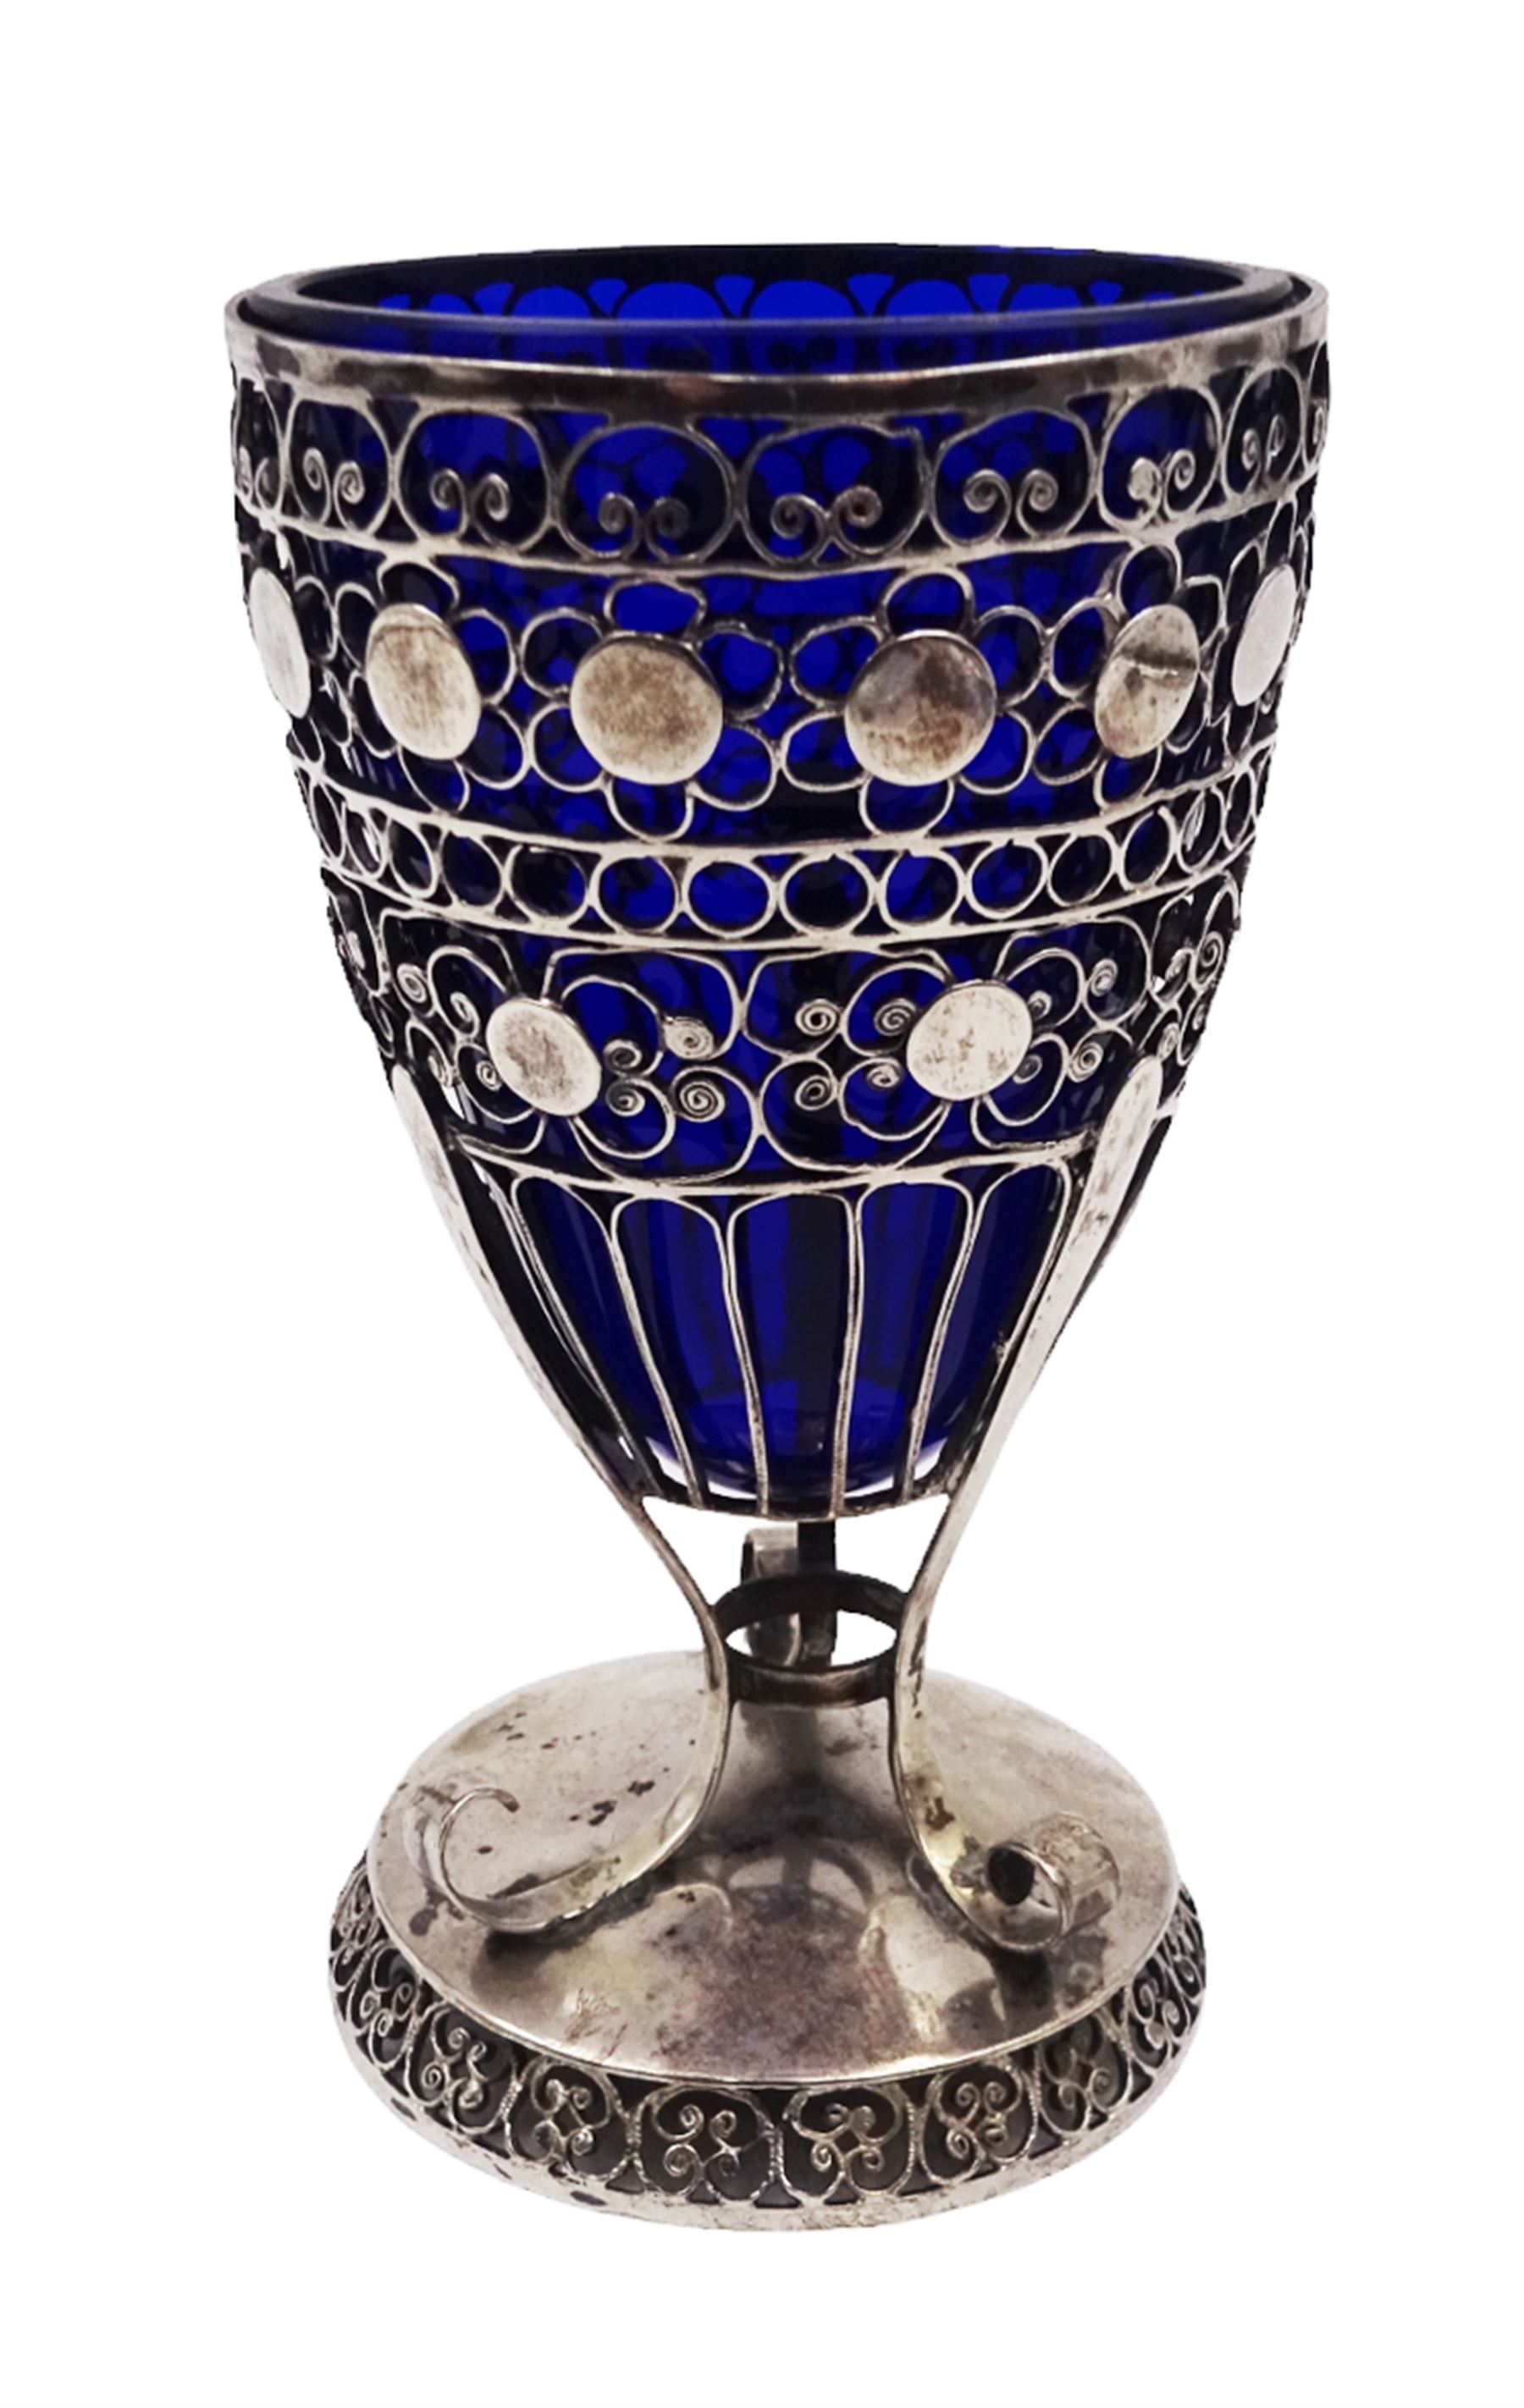 19th/early 20th century silver bon bon dish with blue glass liner